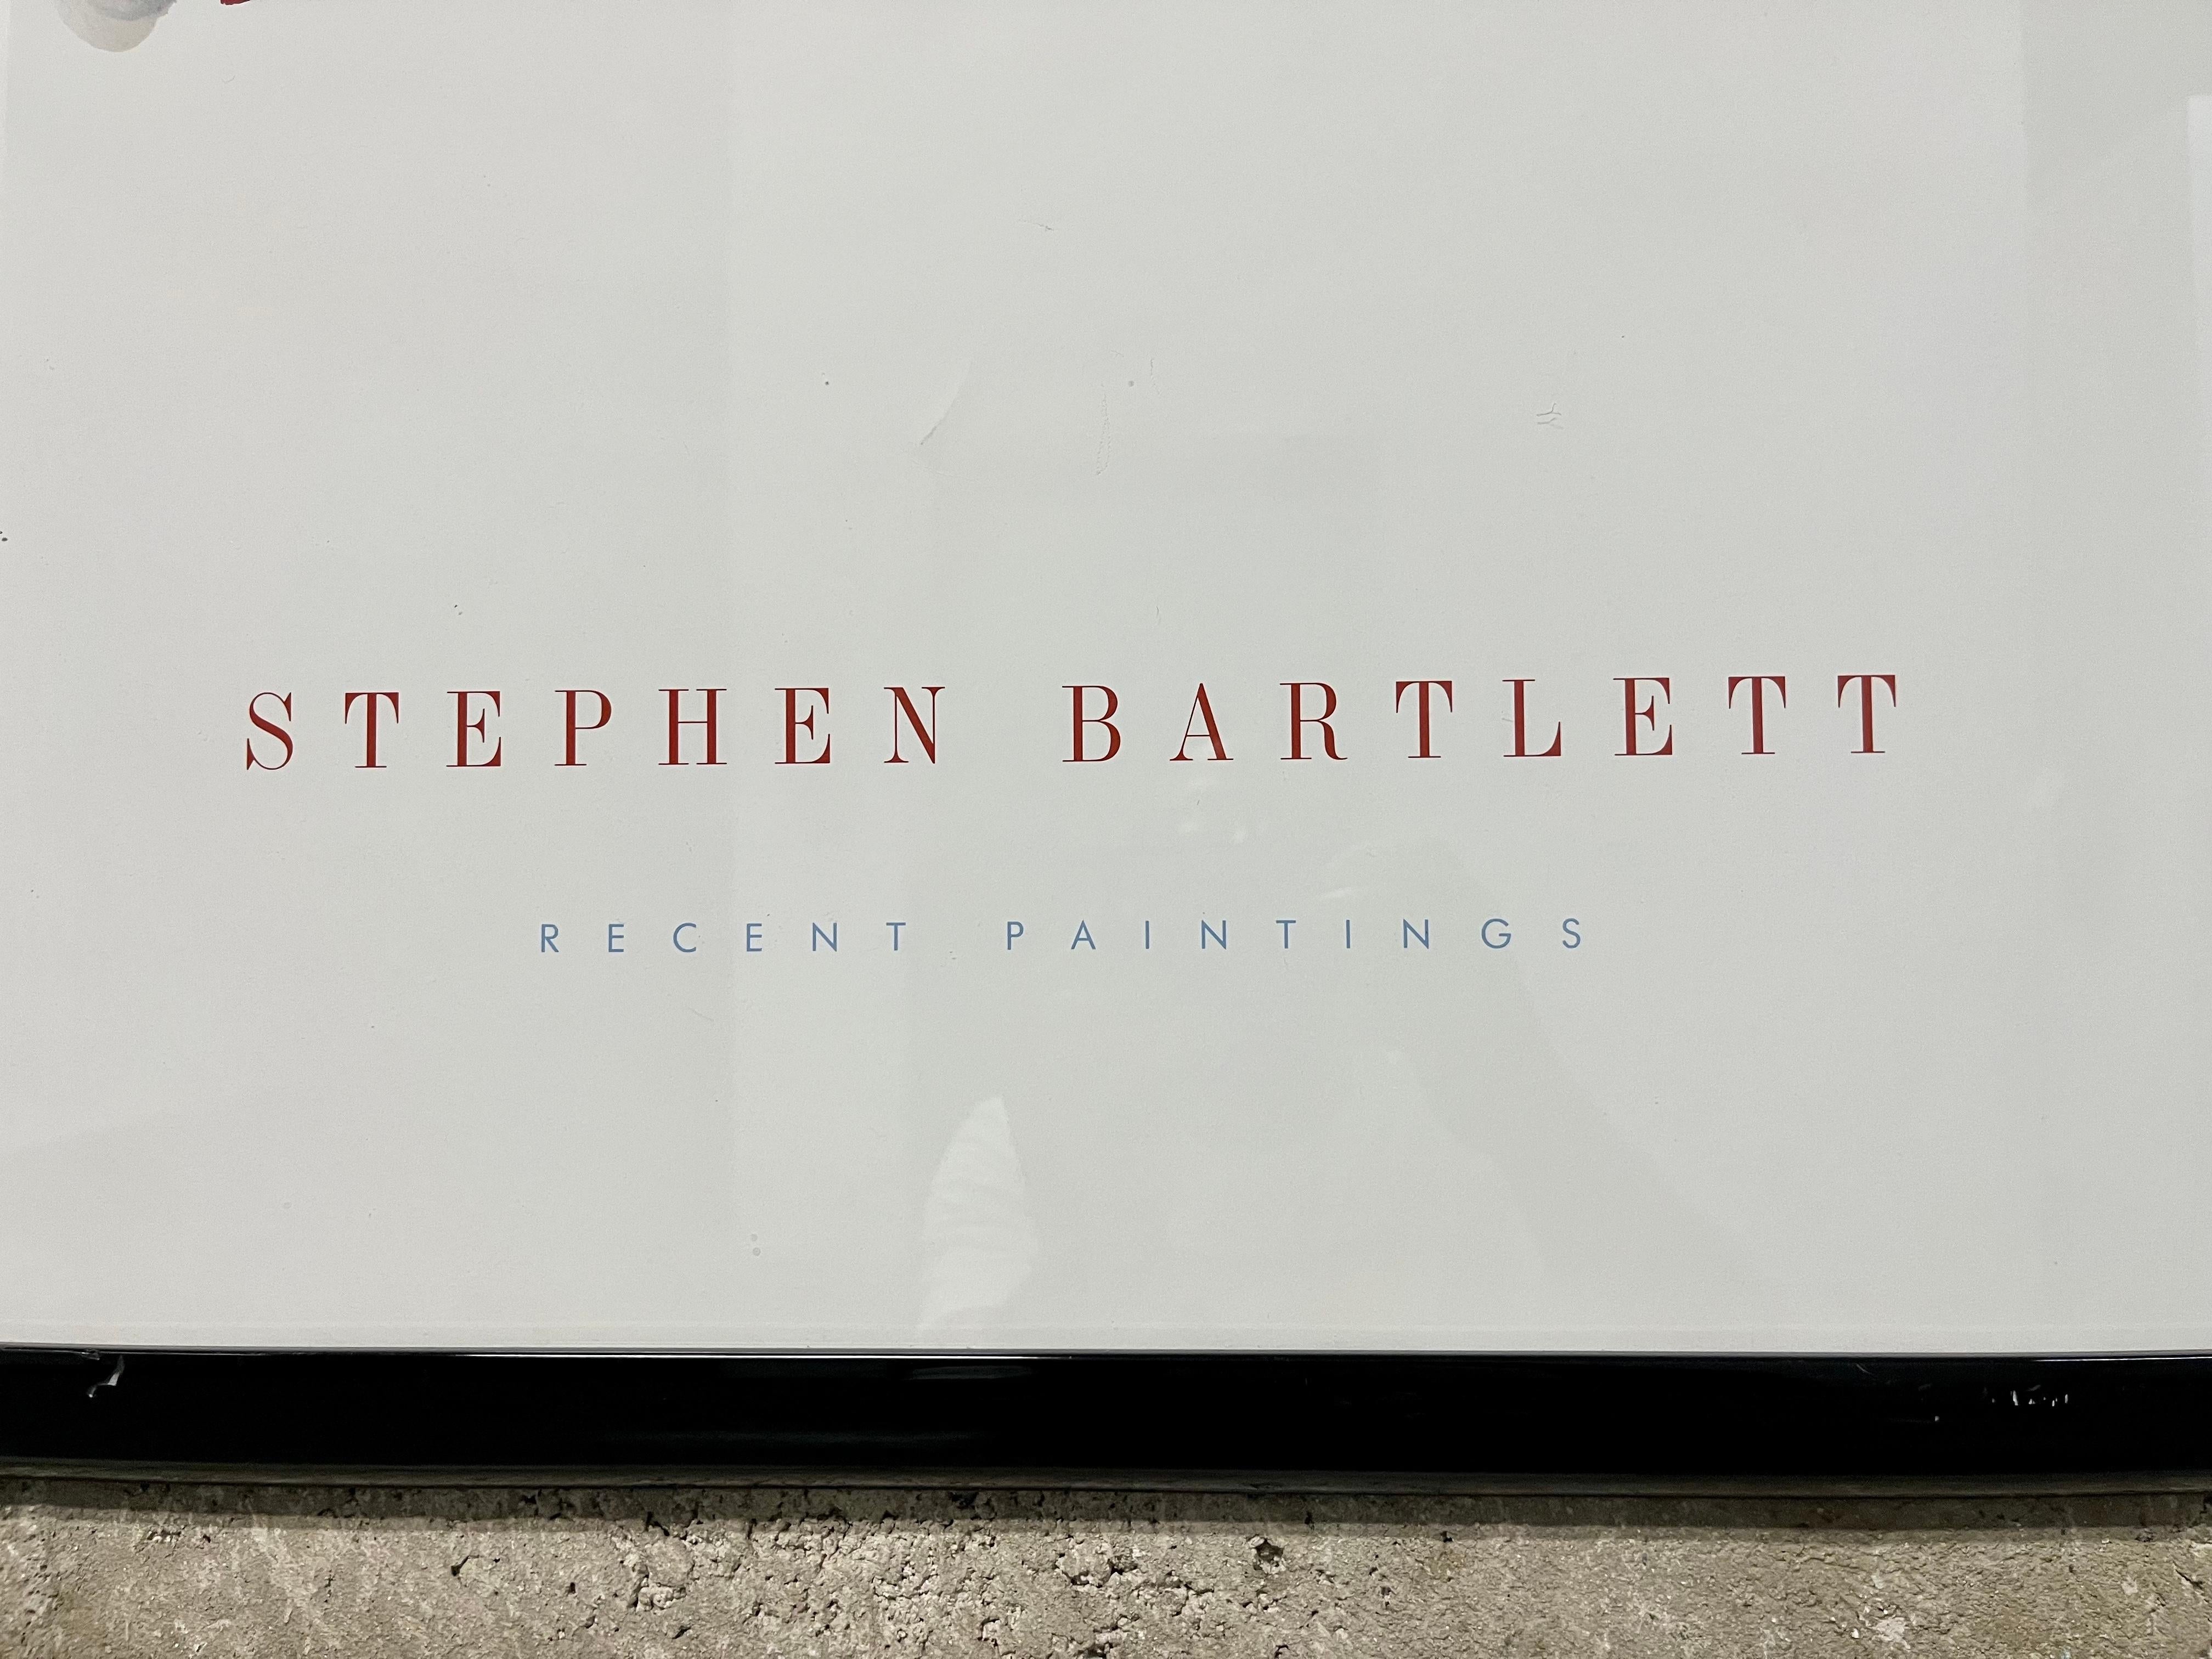 Stephen Bartlett, Recent Paintings, Framed Exhibition Poster. Circa 1980s For Sale 7